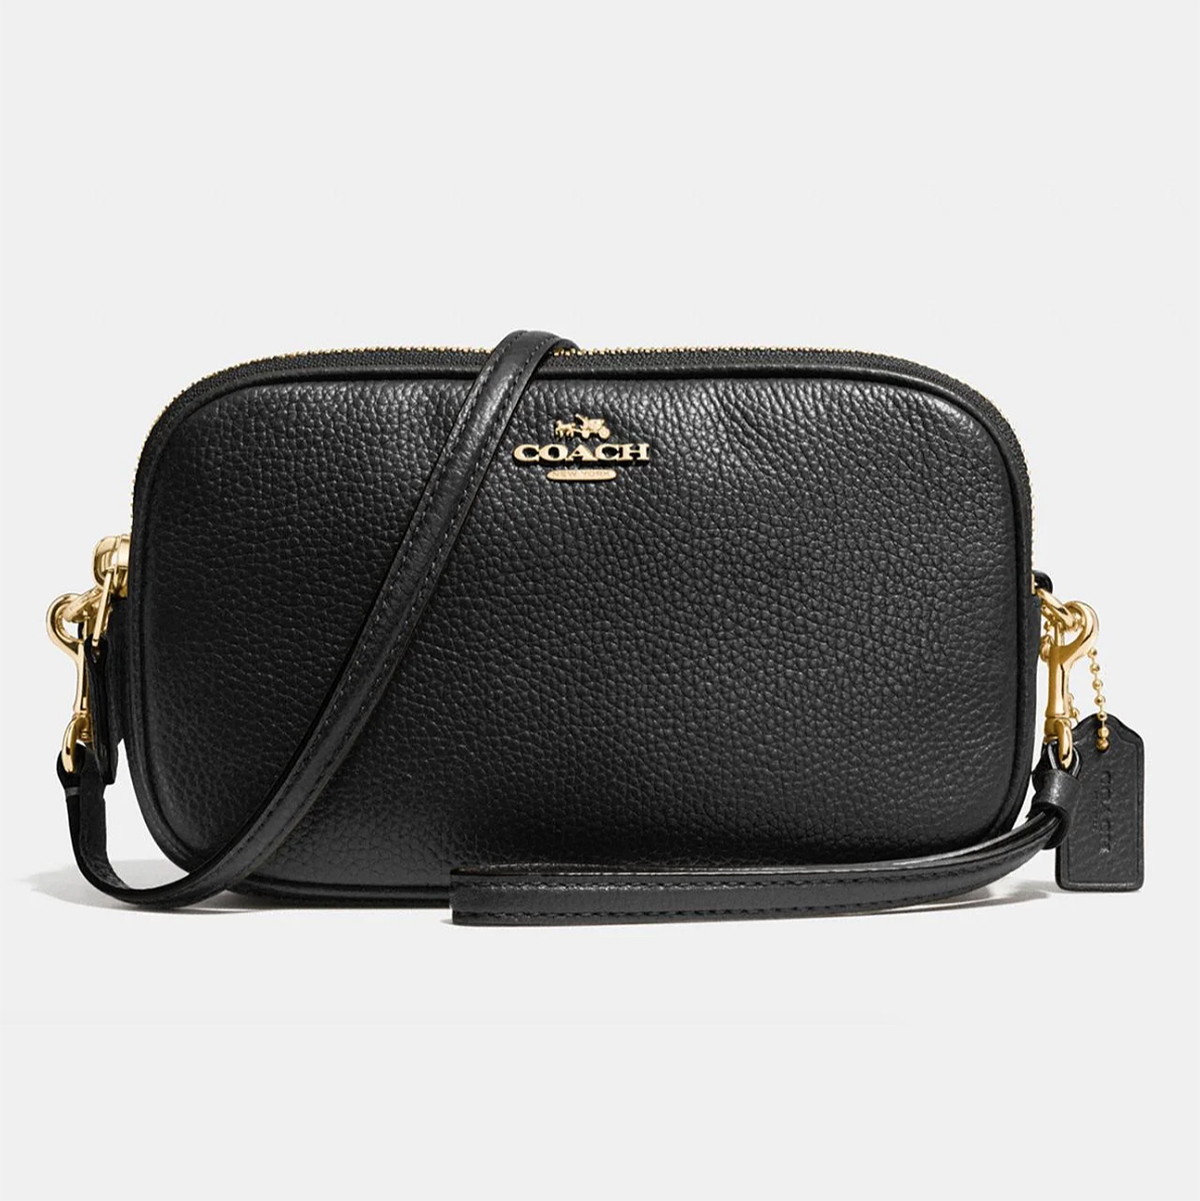 Black Friday Starts Now at Coach — Deals Up to 50% Off!